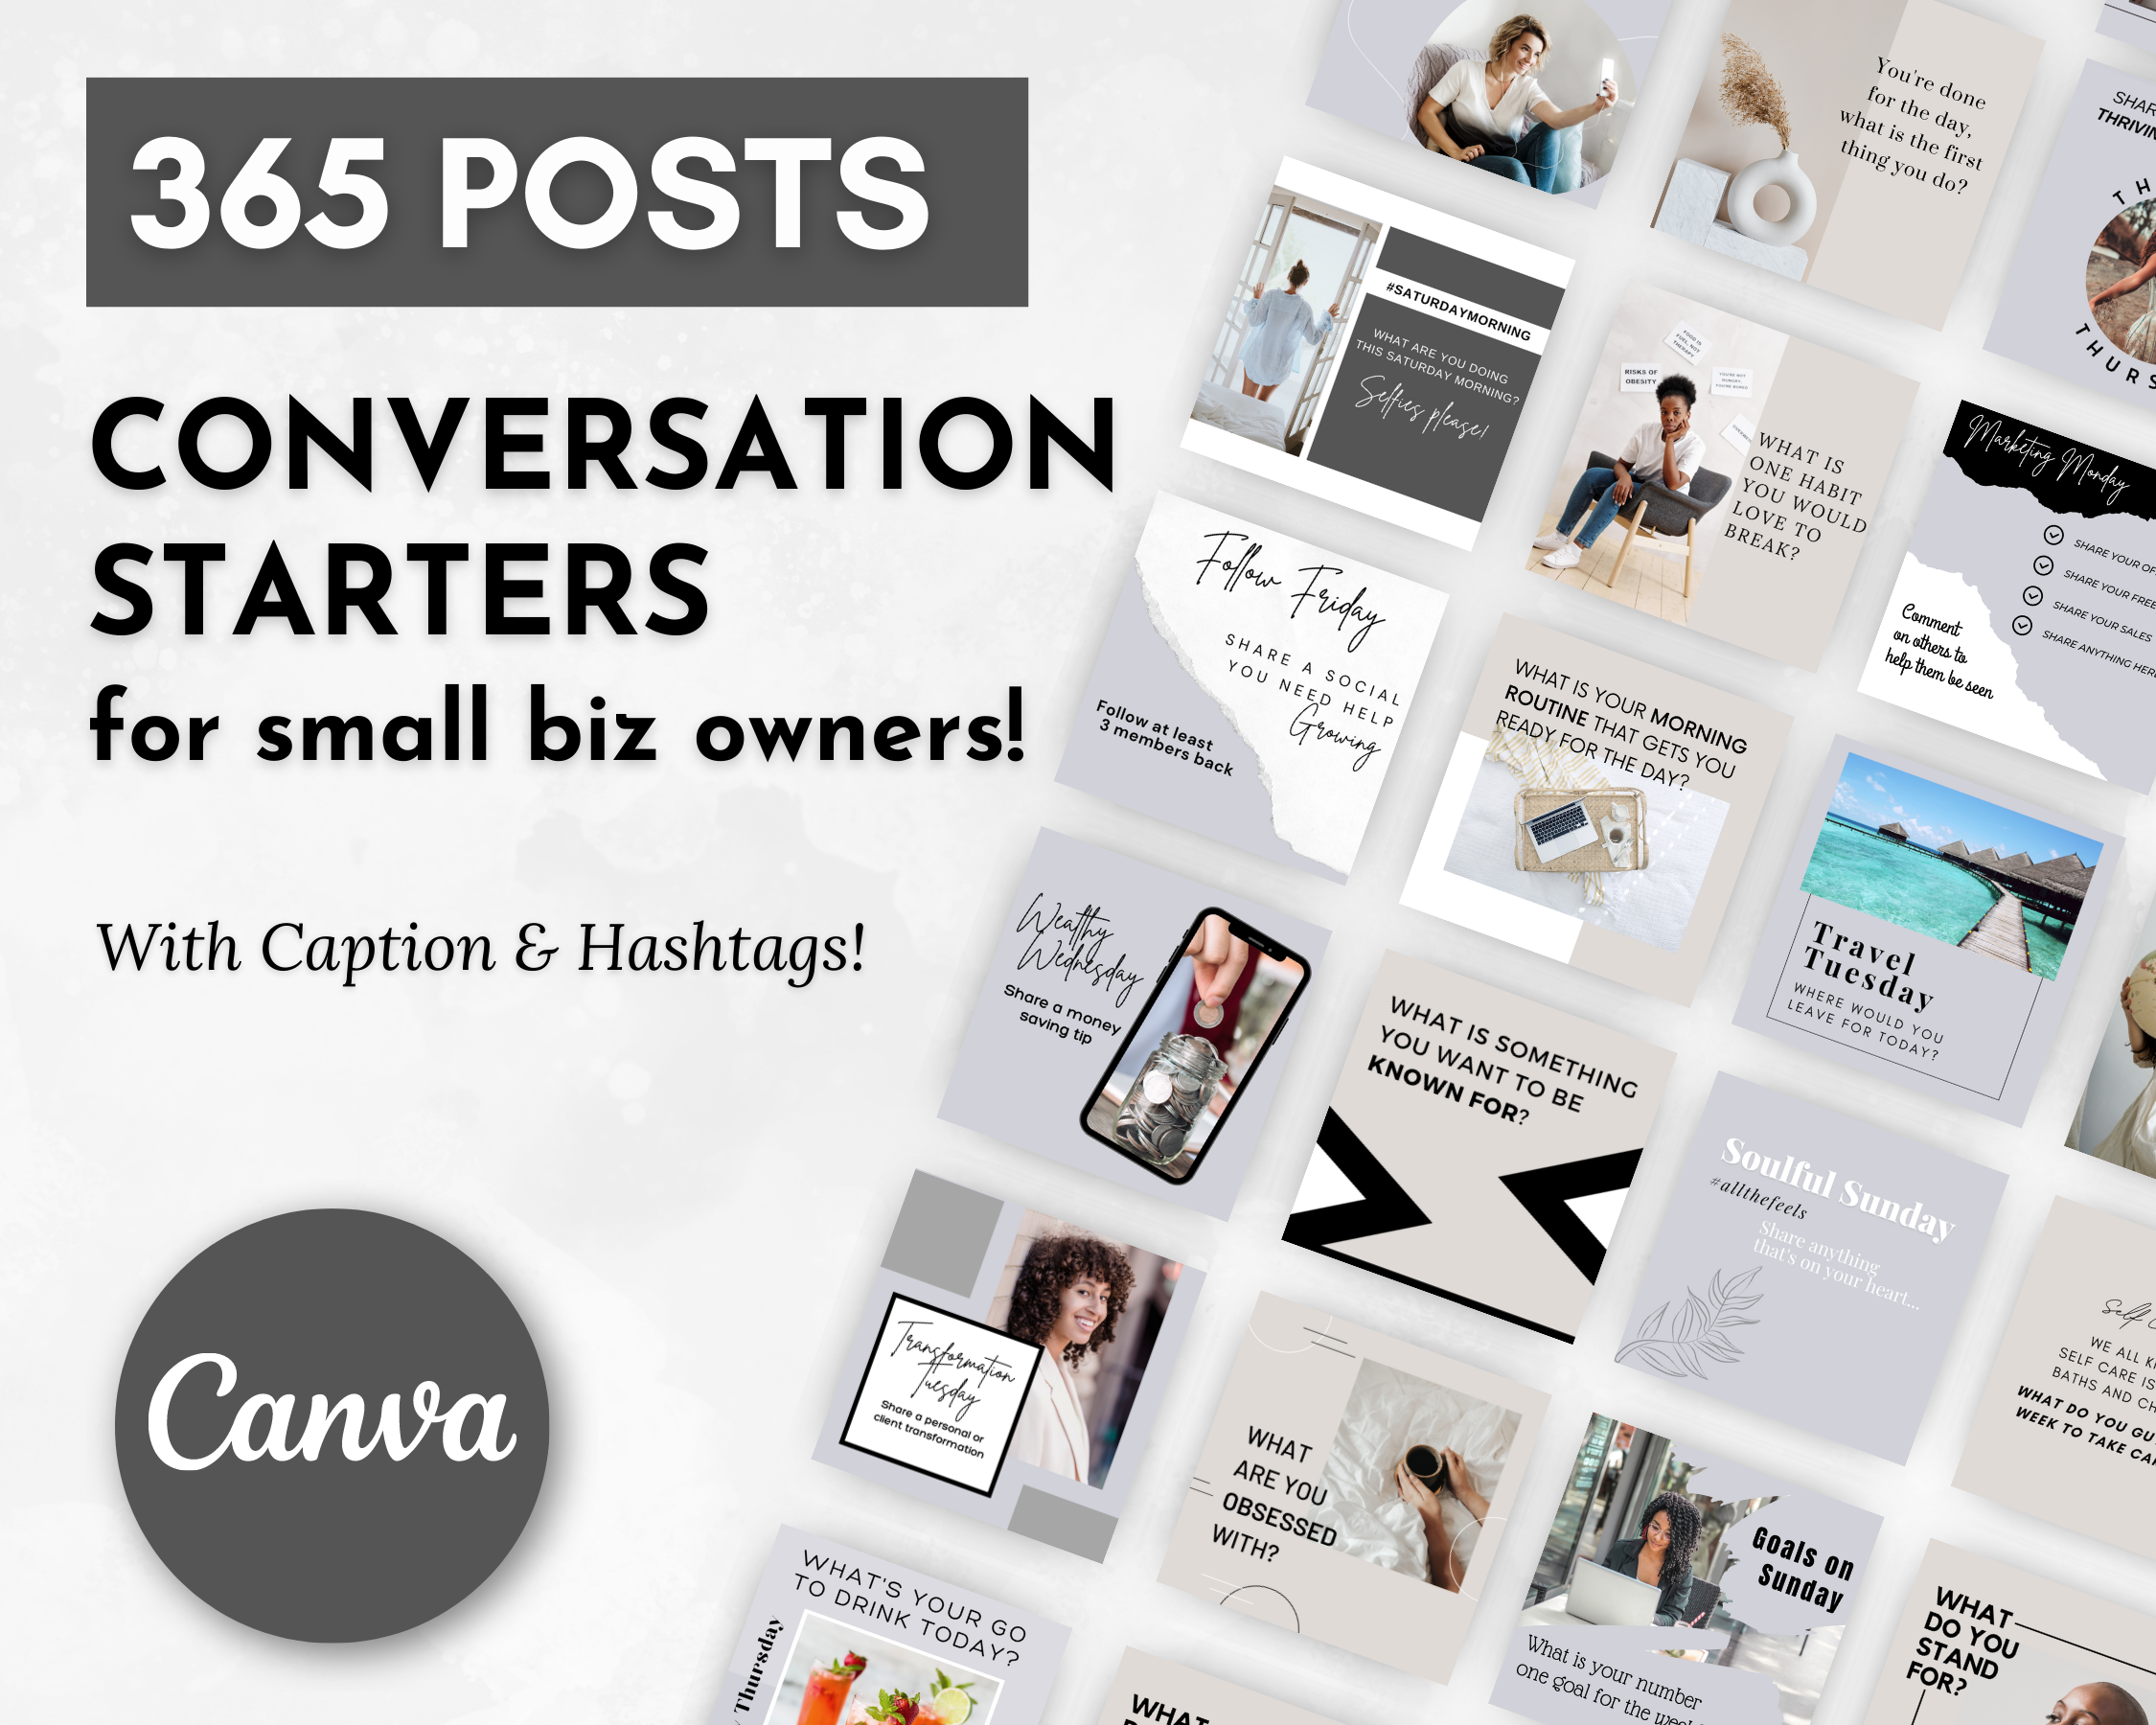 365 conversation starters for small business owners to boost engagement on social media platforms. This Conversation Starters for Social Media Post Bundle, brought to you by Socially Inclined, includes carefully crafted posts with relevant hashtags to captivate your audience and drive more traffic to your business.